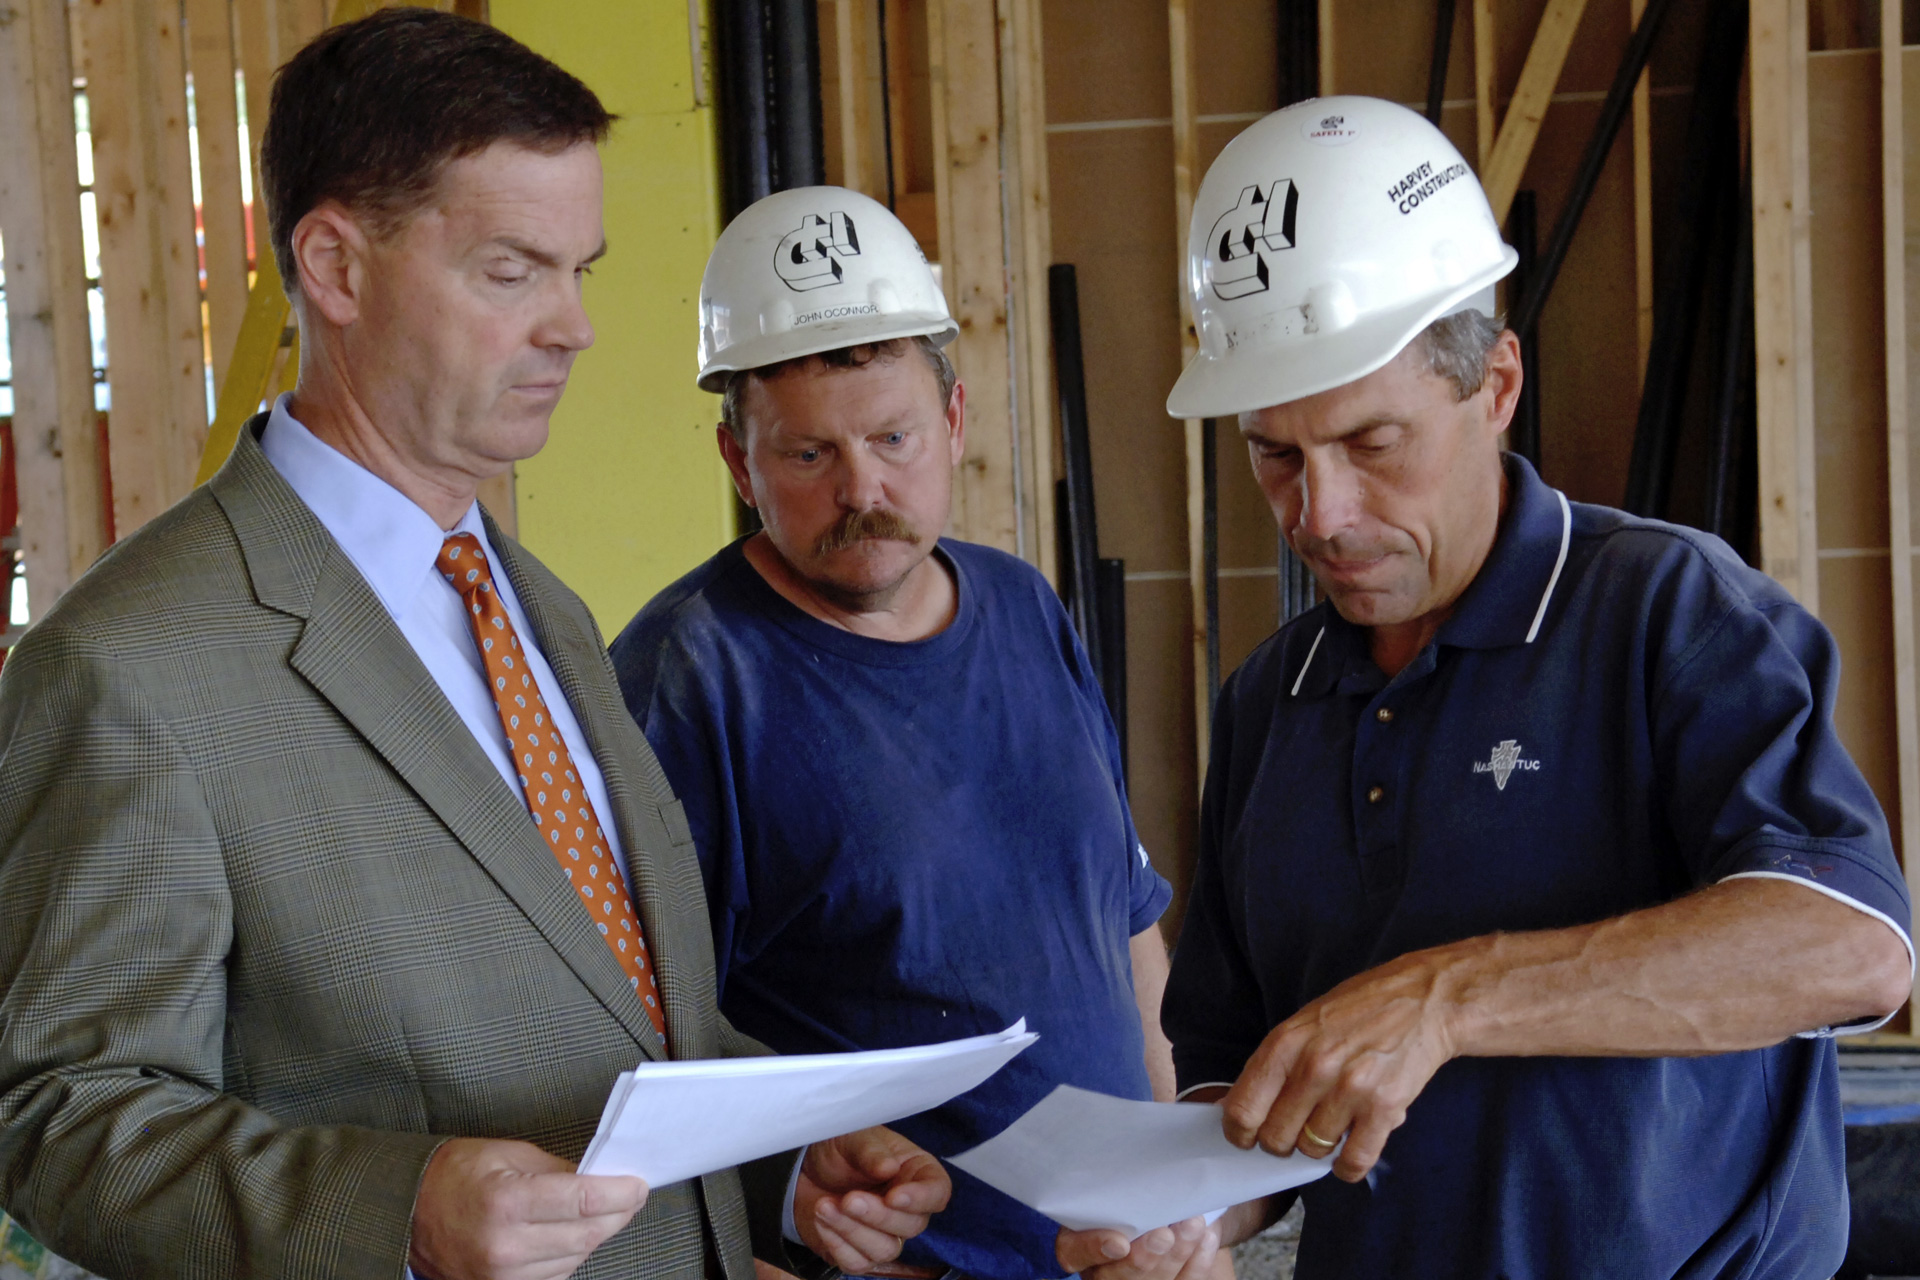 Man in suit and tie talks with a couple builders in safety helmets